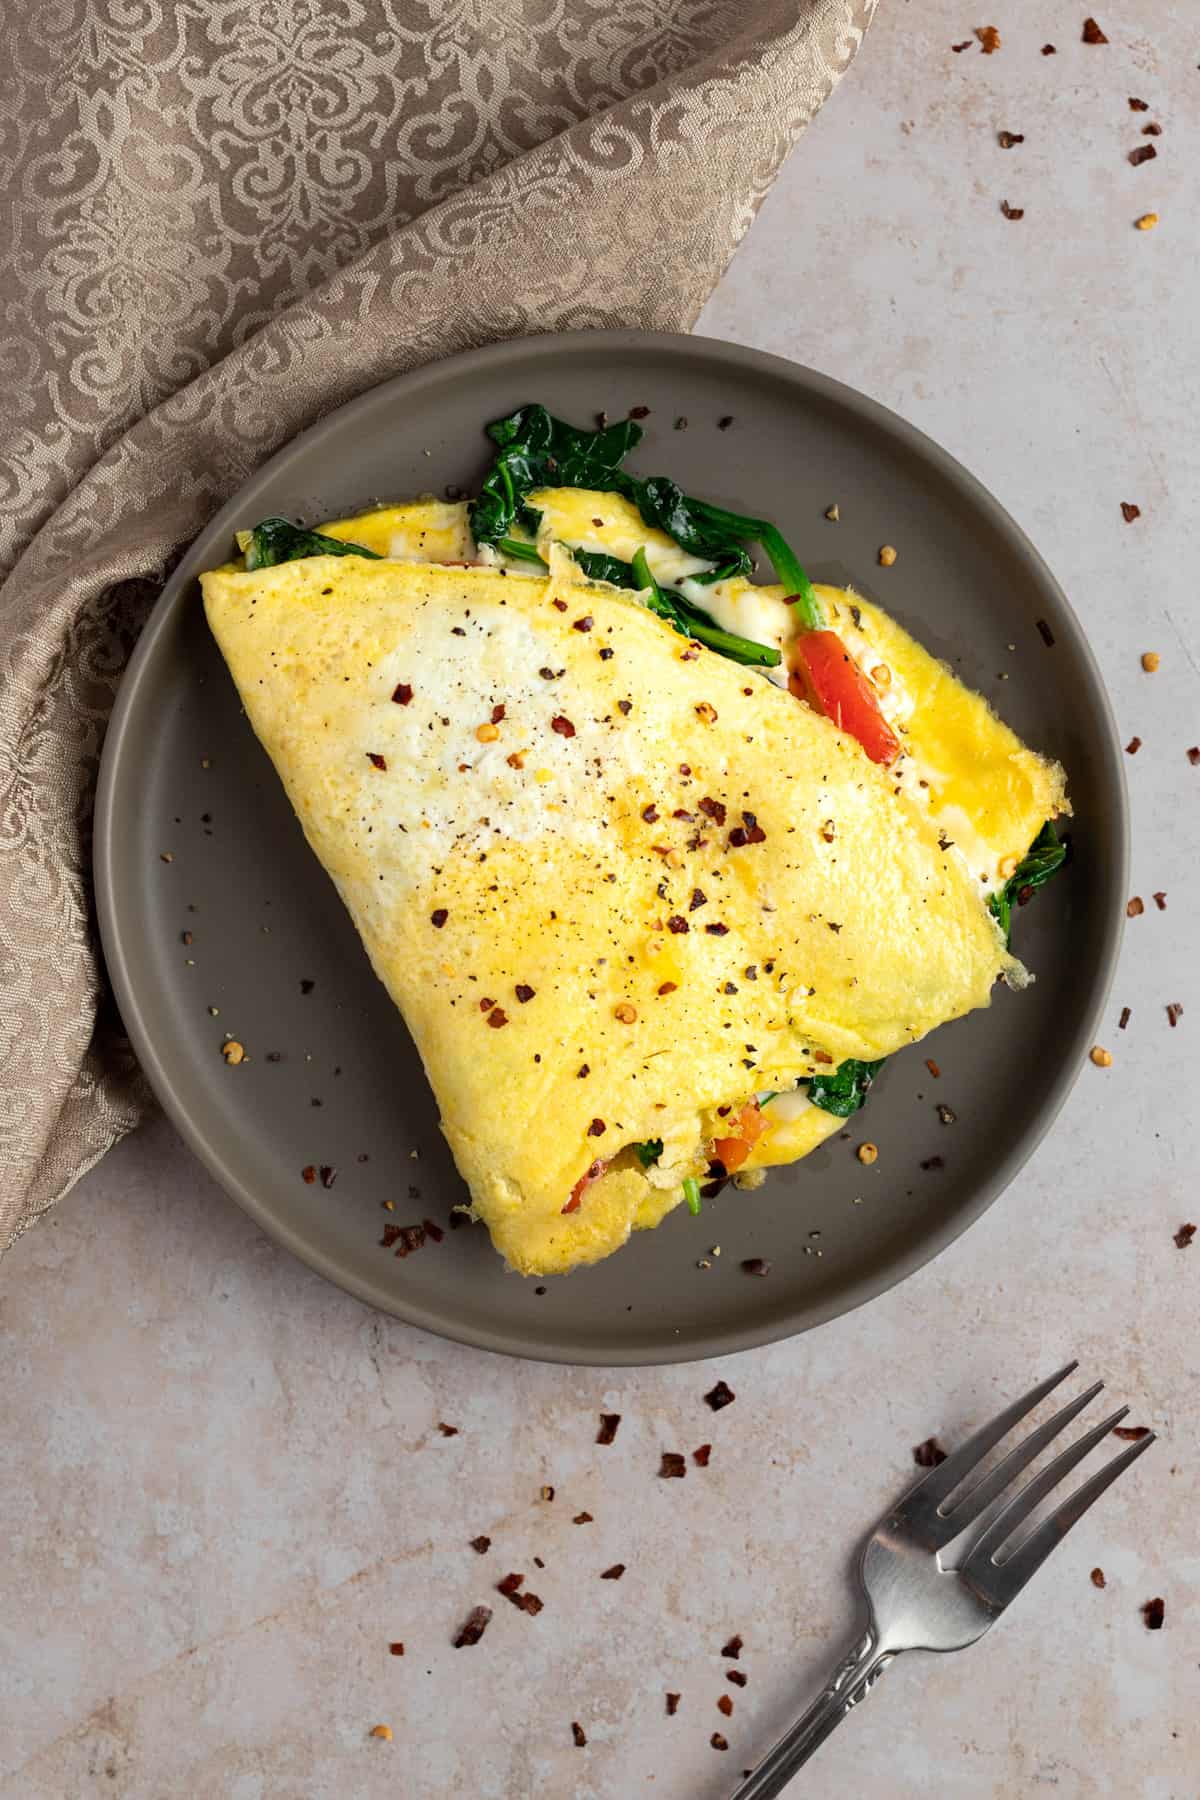 Overhead view of a feta spinach omelette topped with red pepper flakes, on a round brown plate.